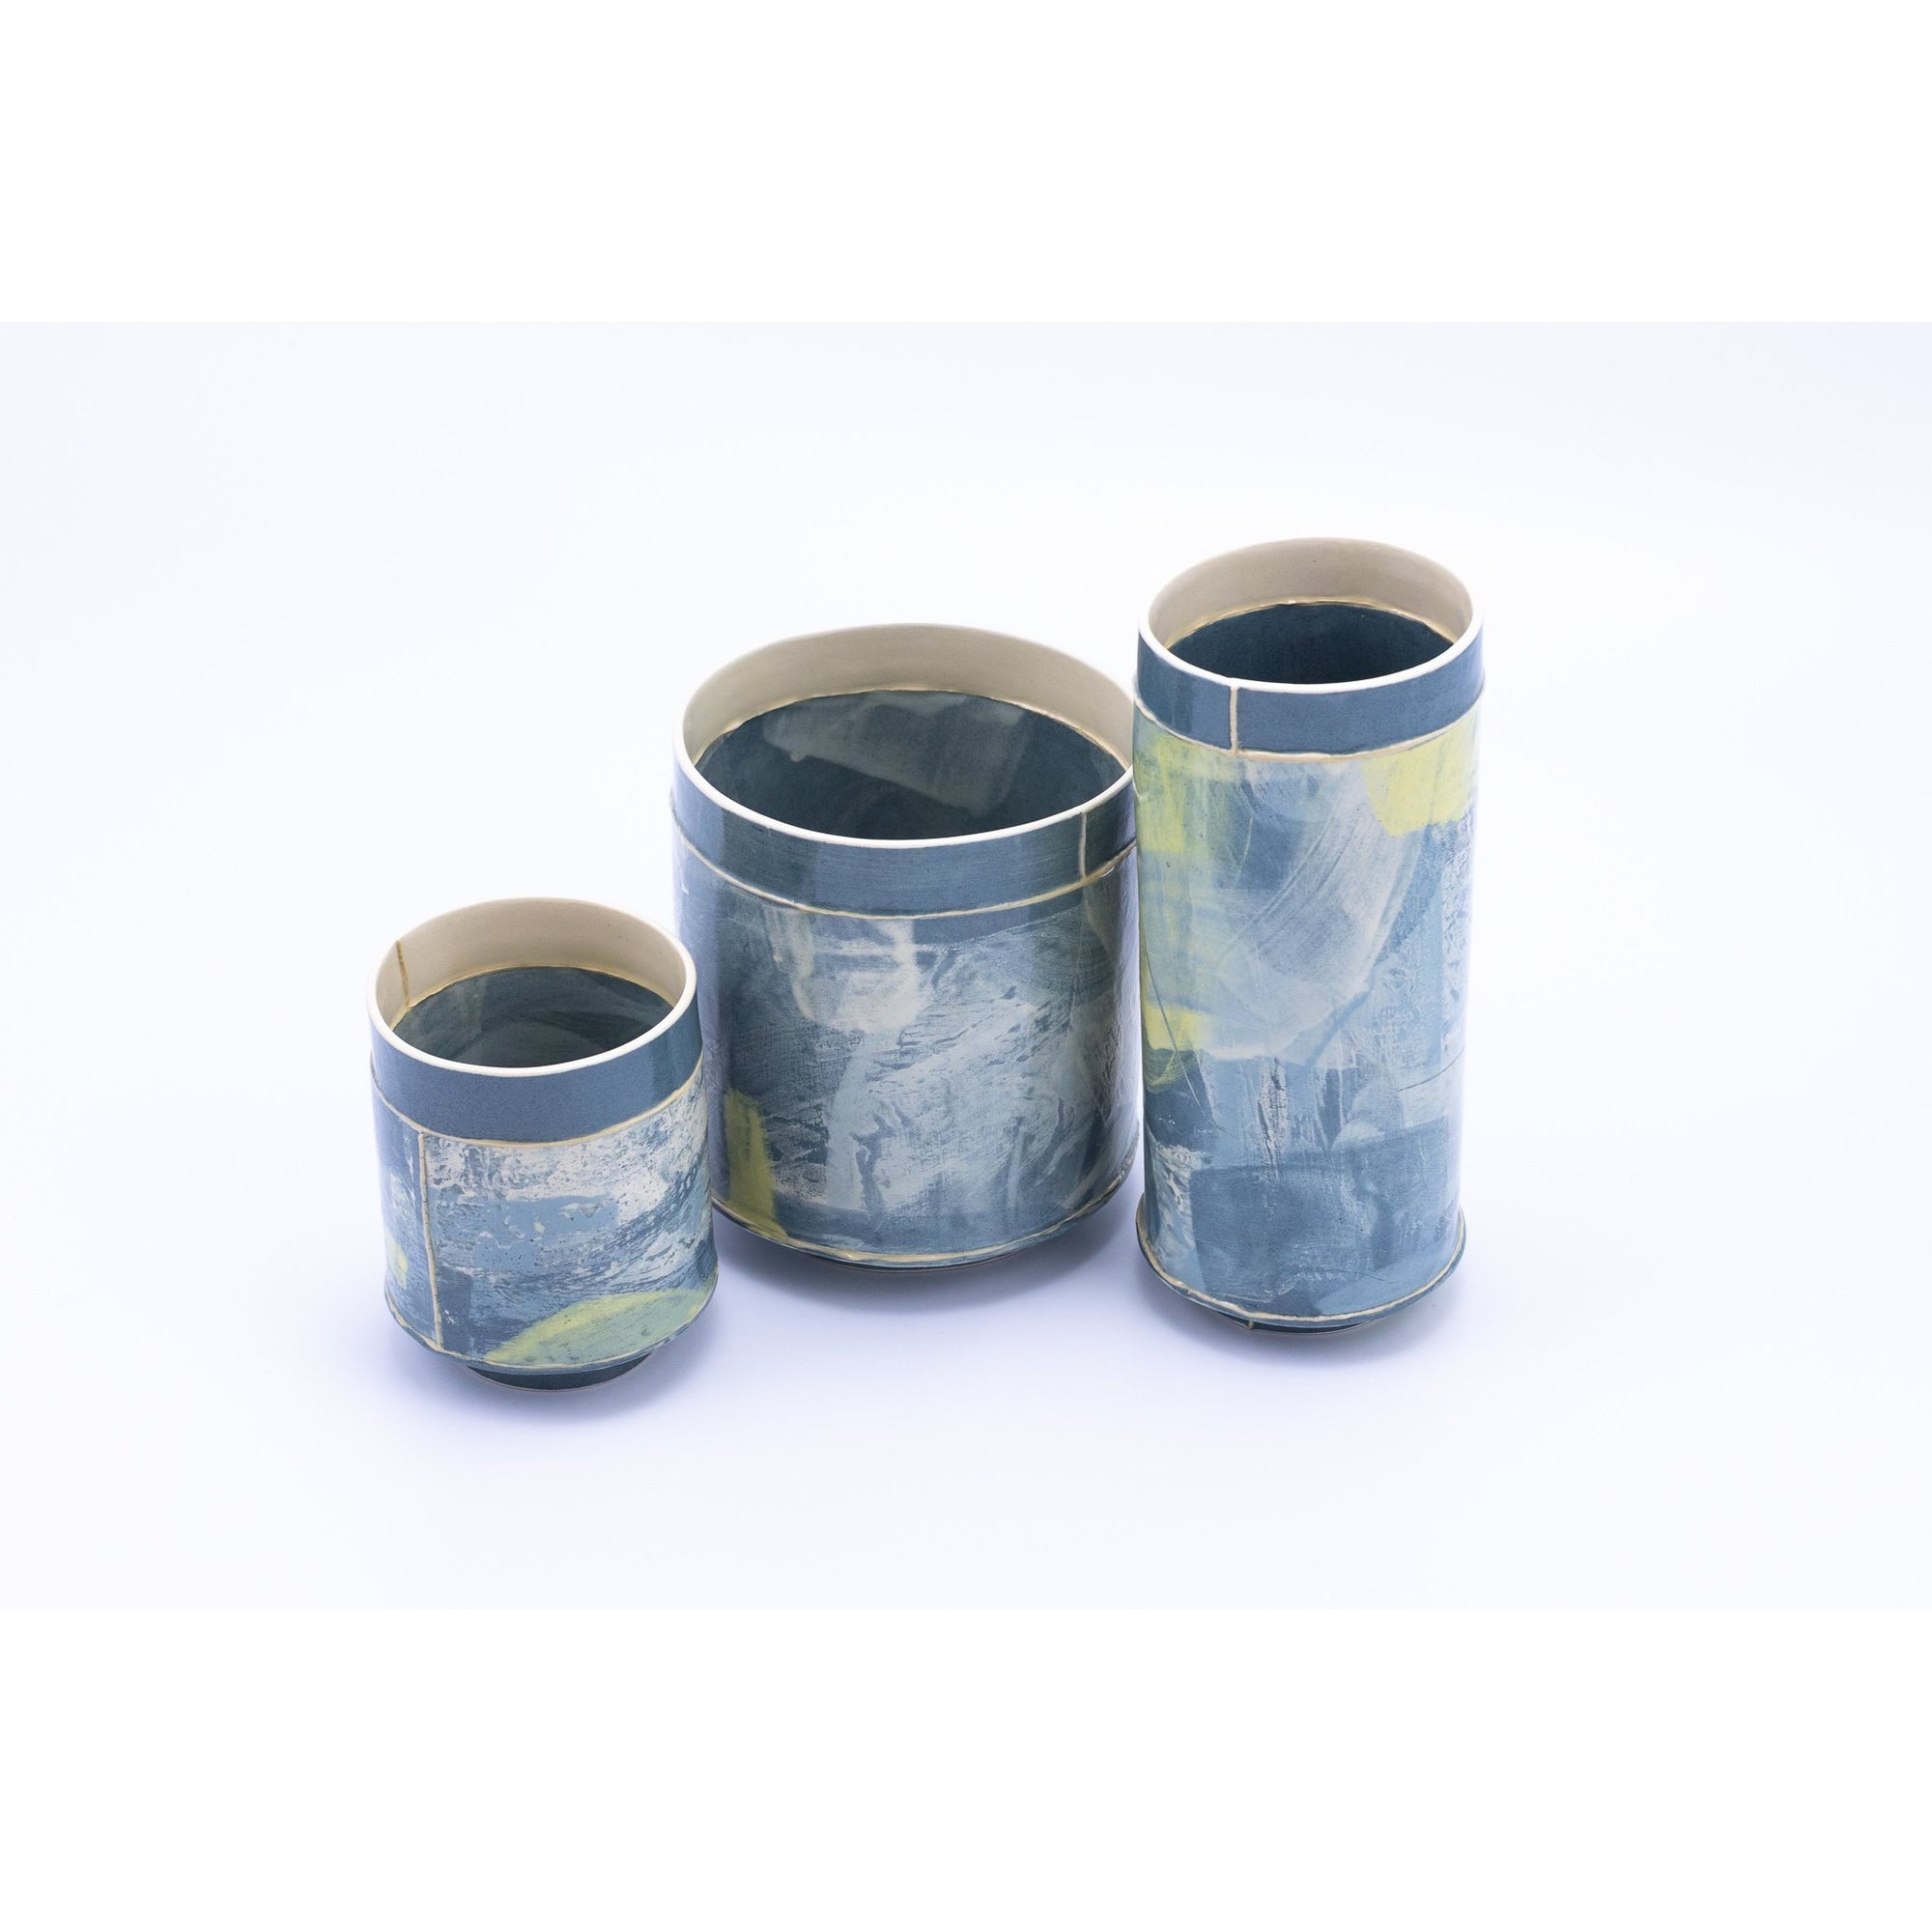 Handbuilt ceramic vessel group by Emily-Kriste Wilcox, available from Padstow Gallery, Cornwall